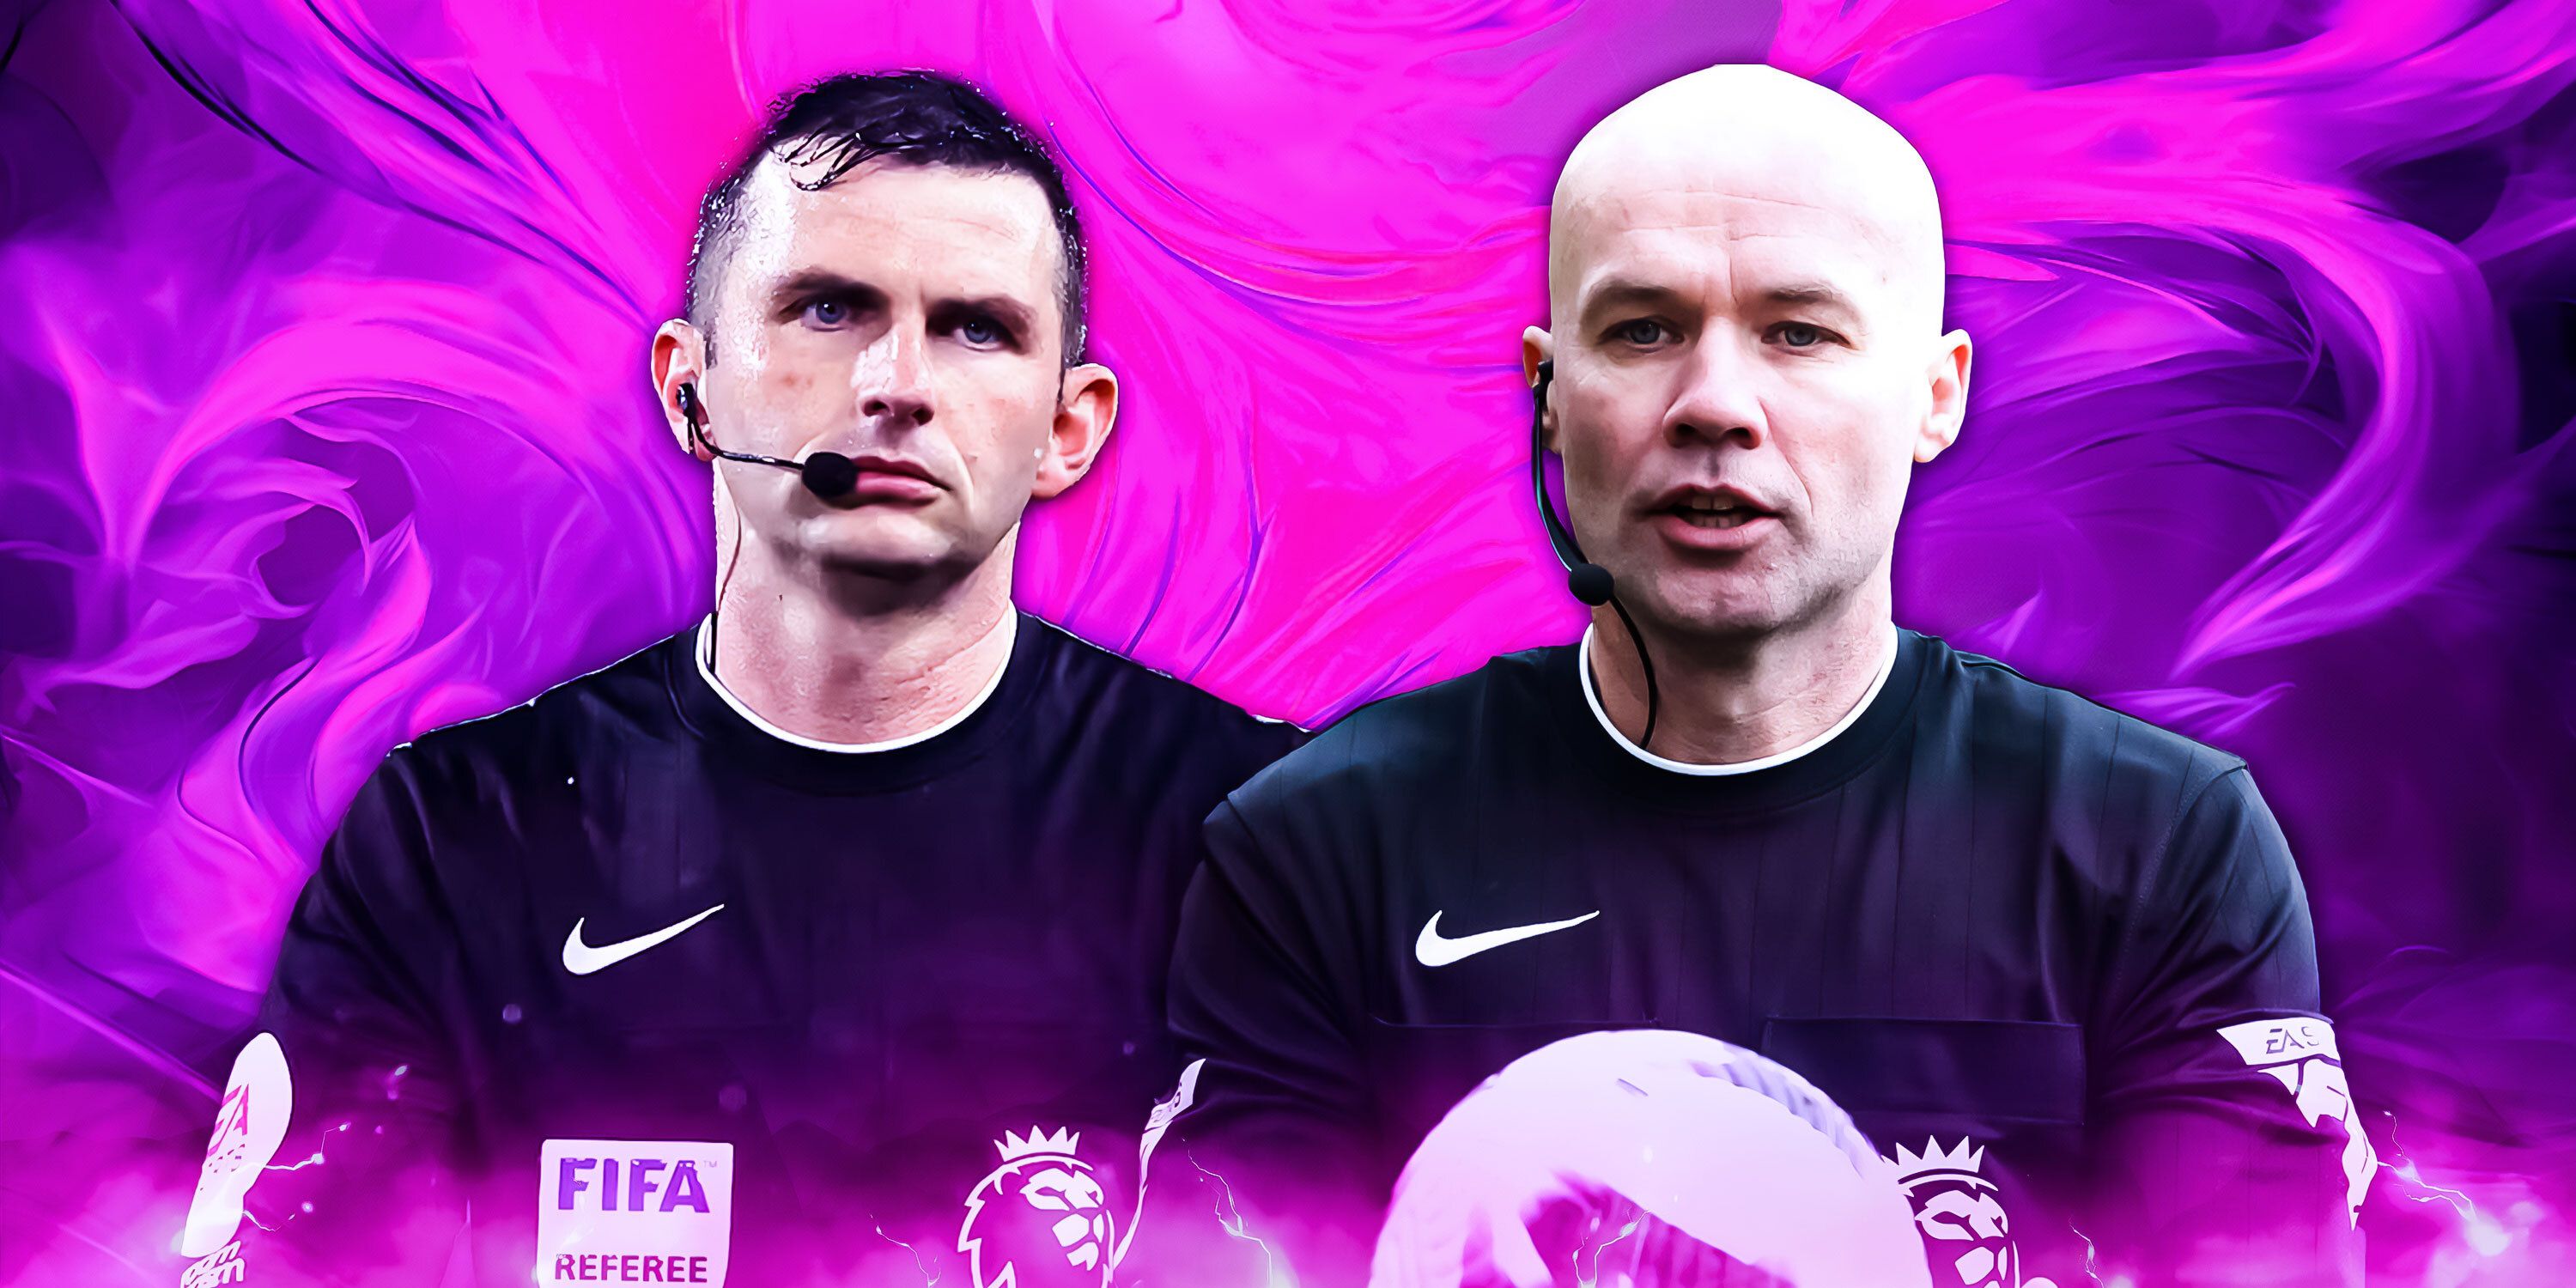 Premier League referees Michael Oliver and Paul Tierney.